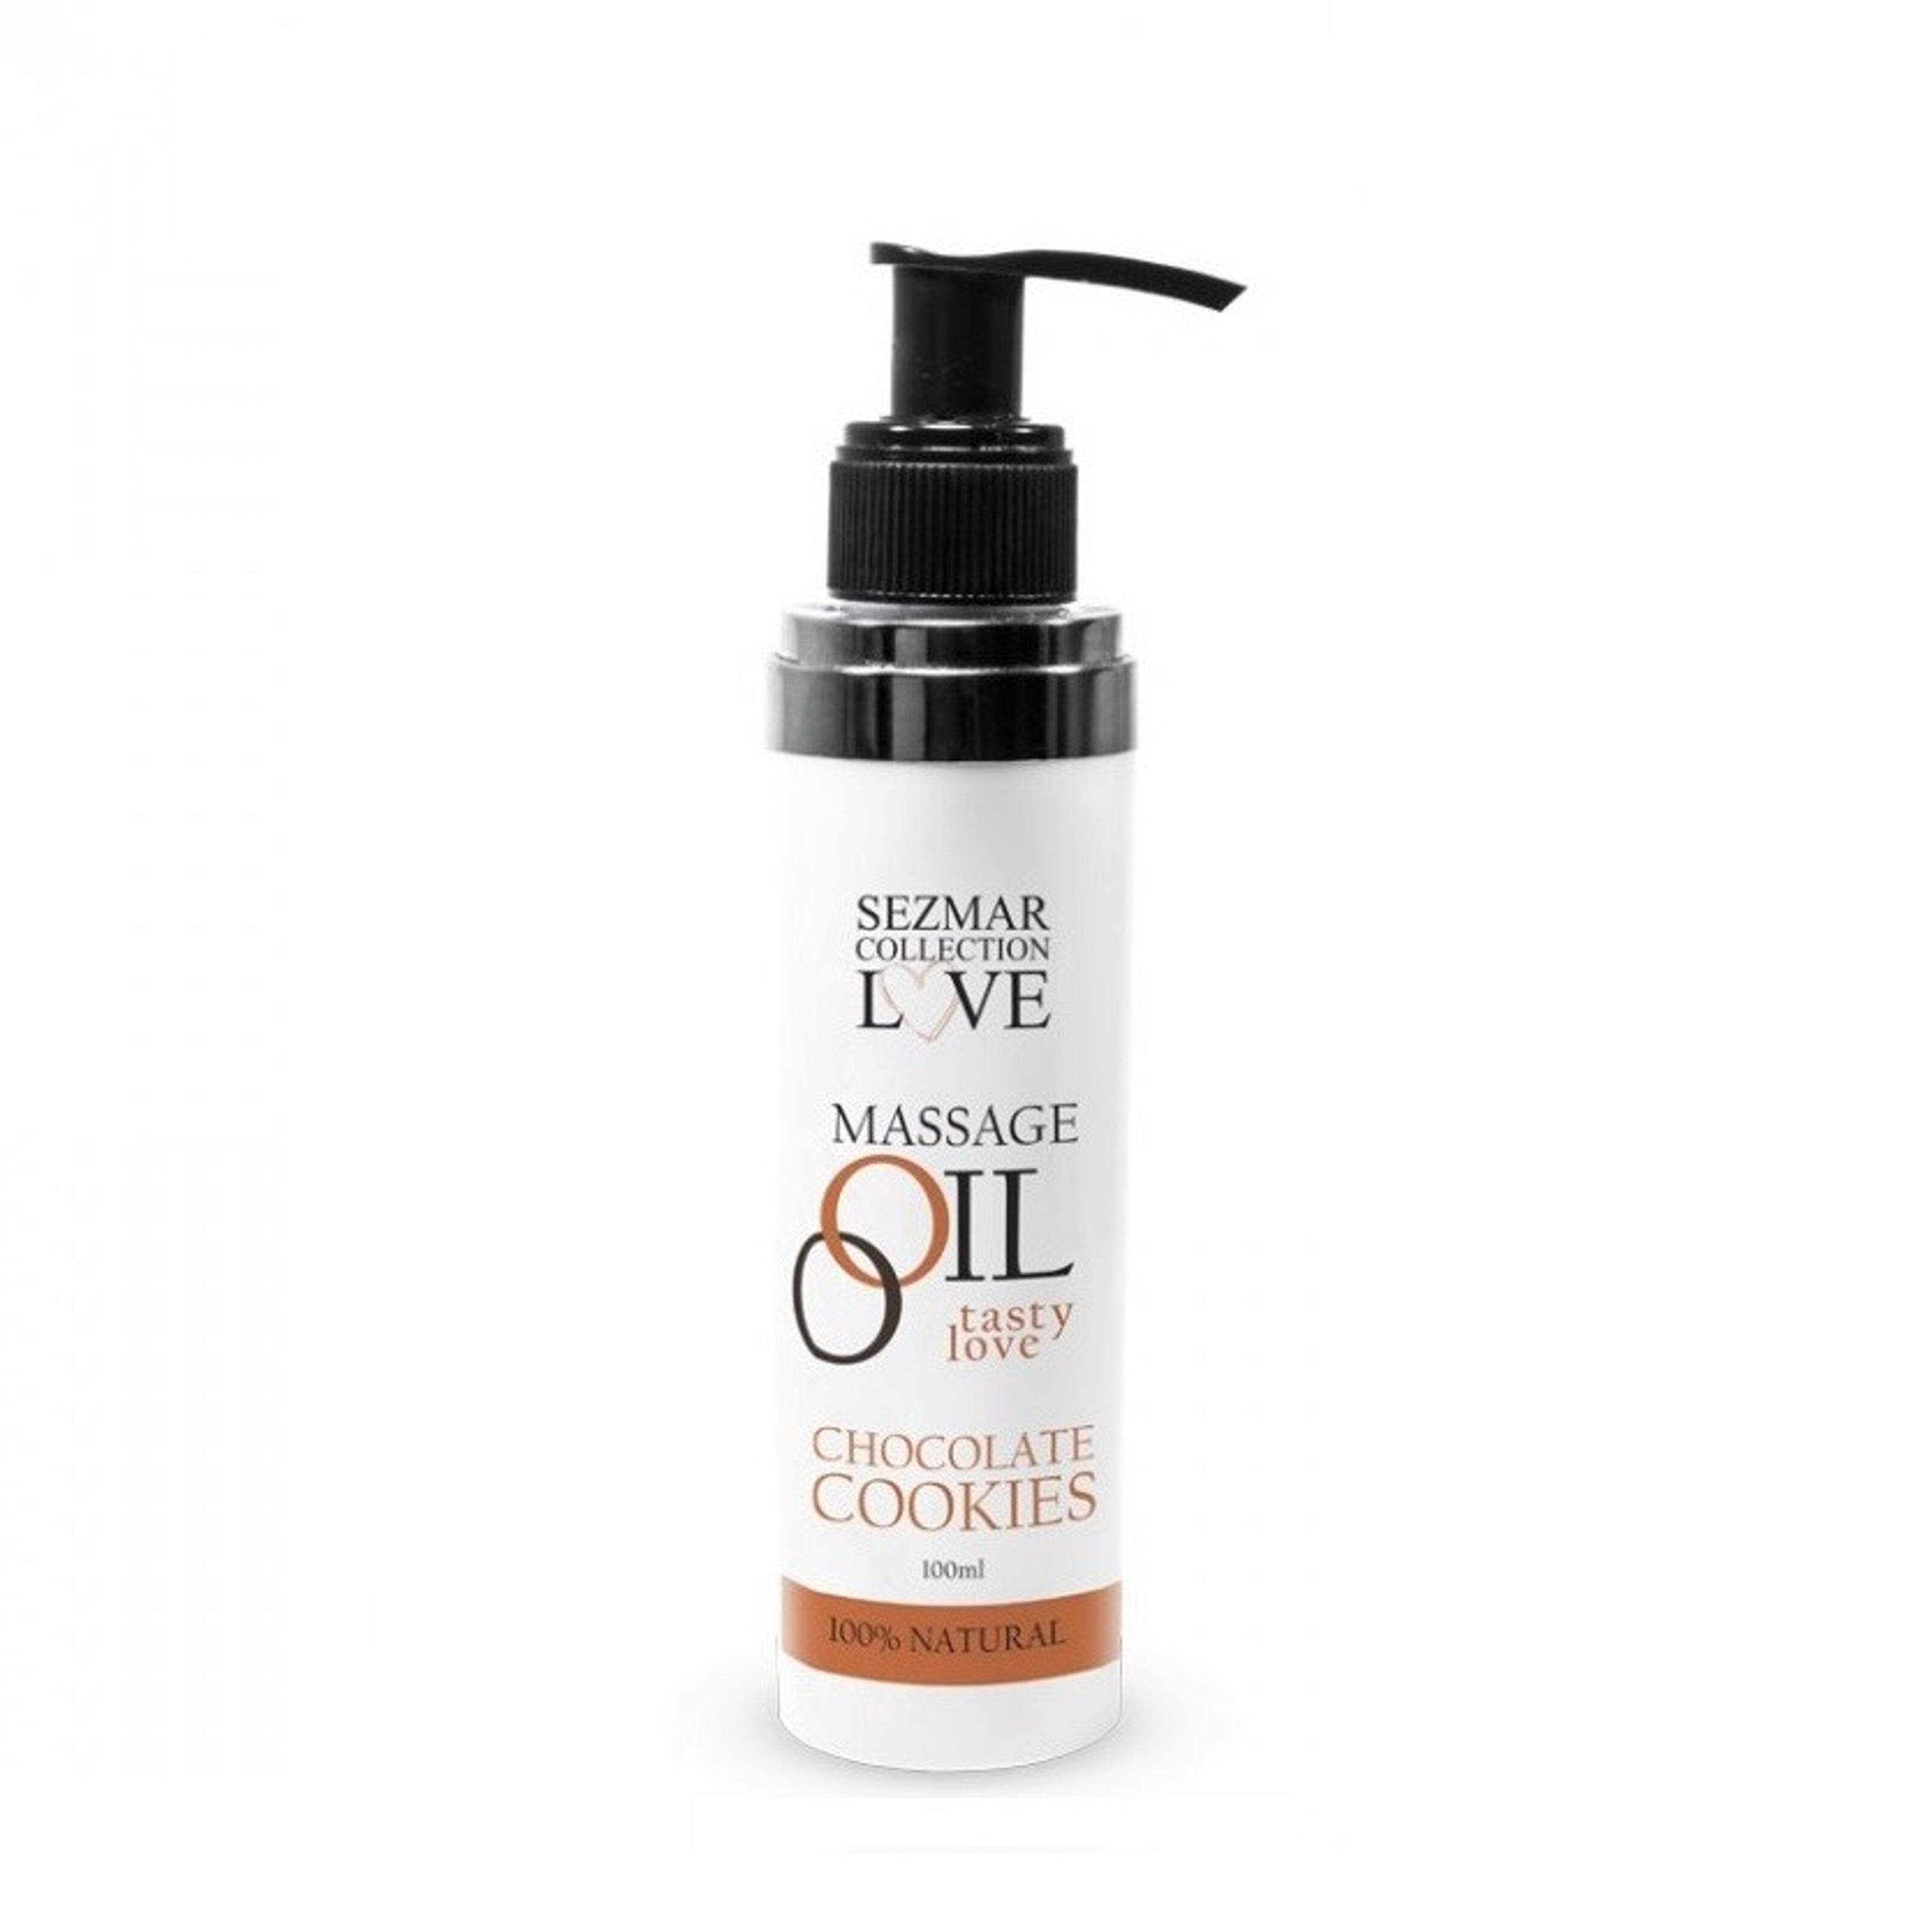 Premium Body Oil 1oz Roll-on (Standard Label) - As Low As $2.99